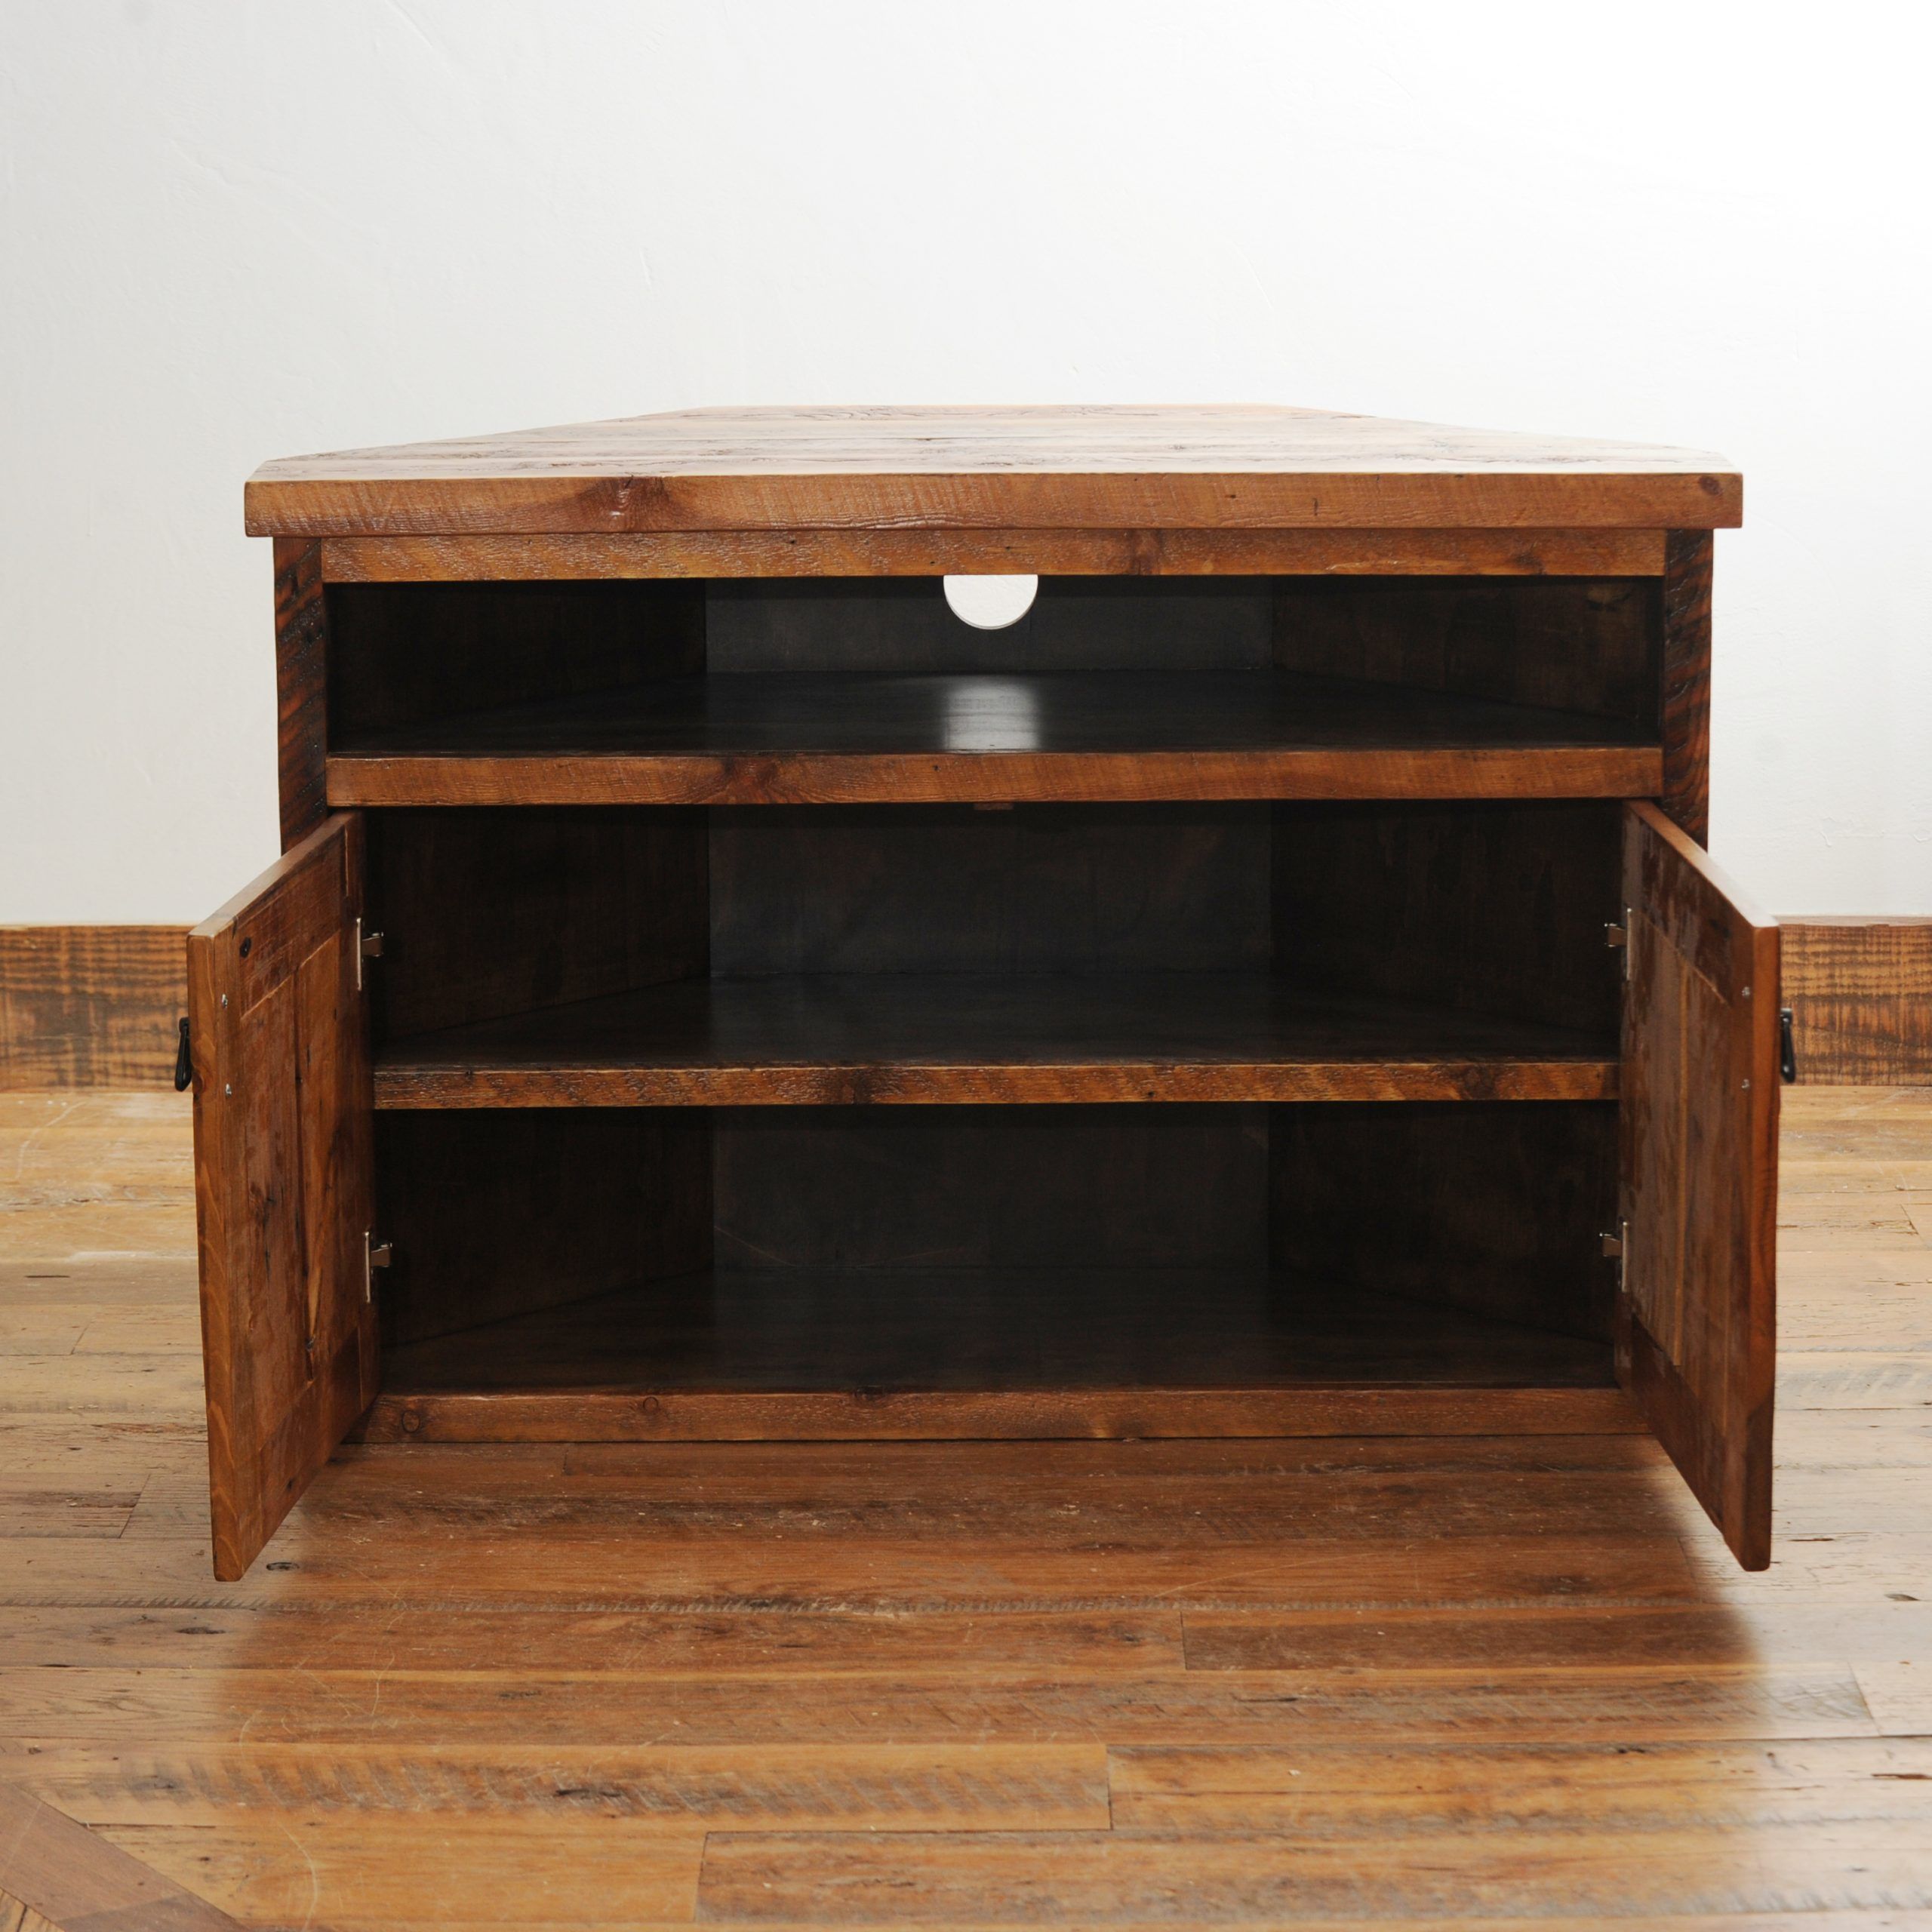 Rustic Wood Corner Tv Stand With Storage | Four Corner Inside Rustic Wood Tv Cabinets (View 1 of 15)